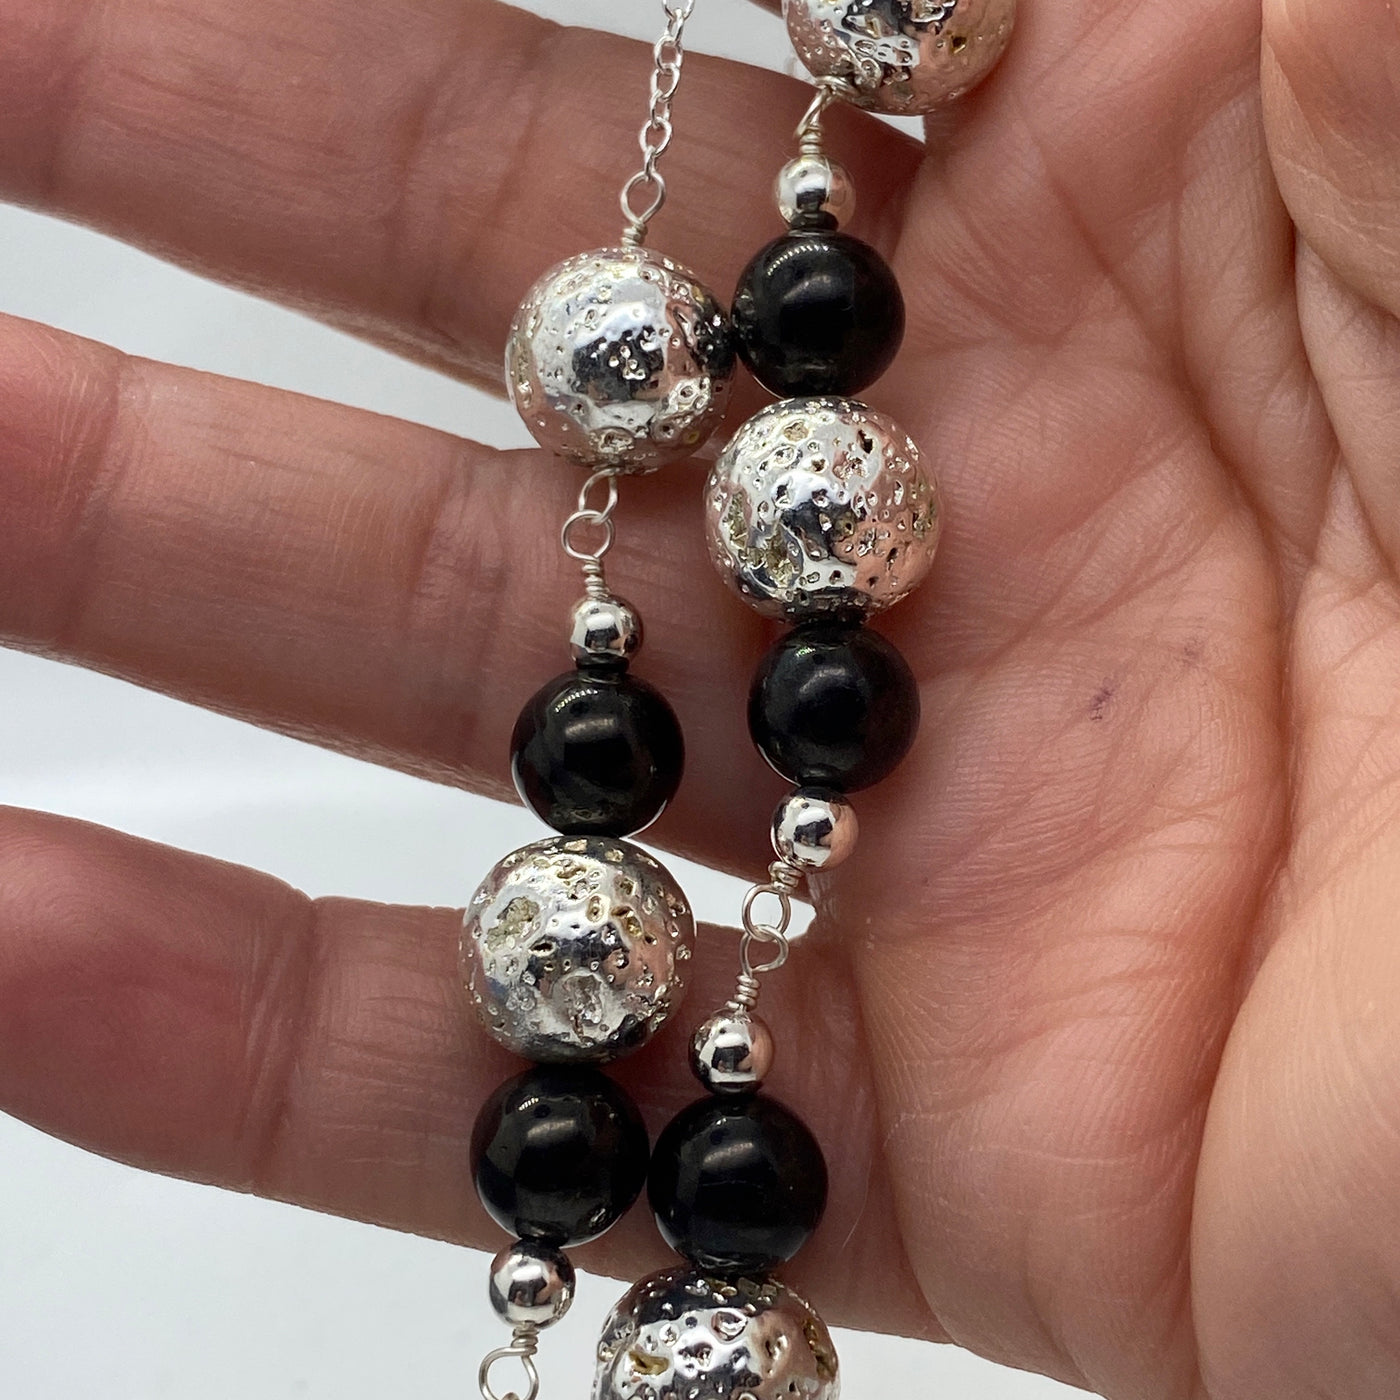 Lavastones silver beads and jet 8mm black beads on chain.